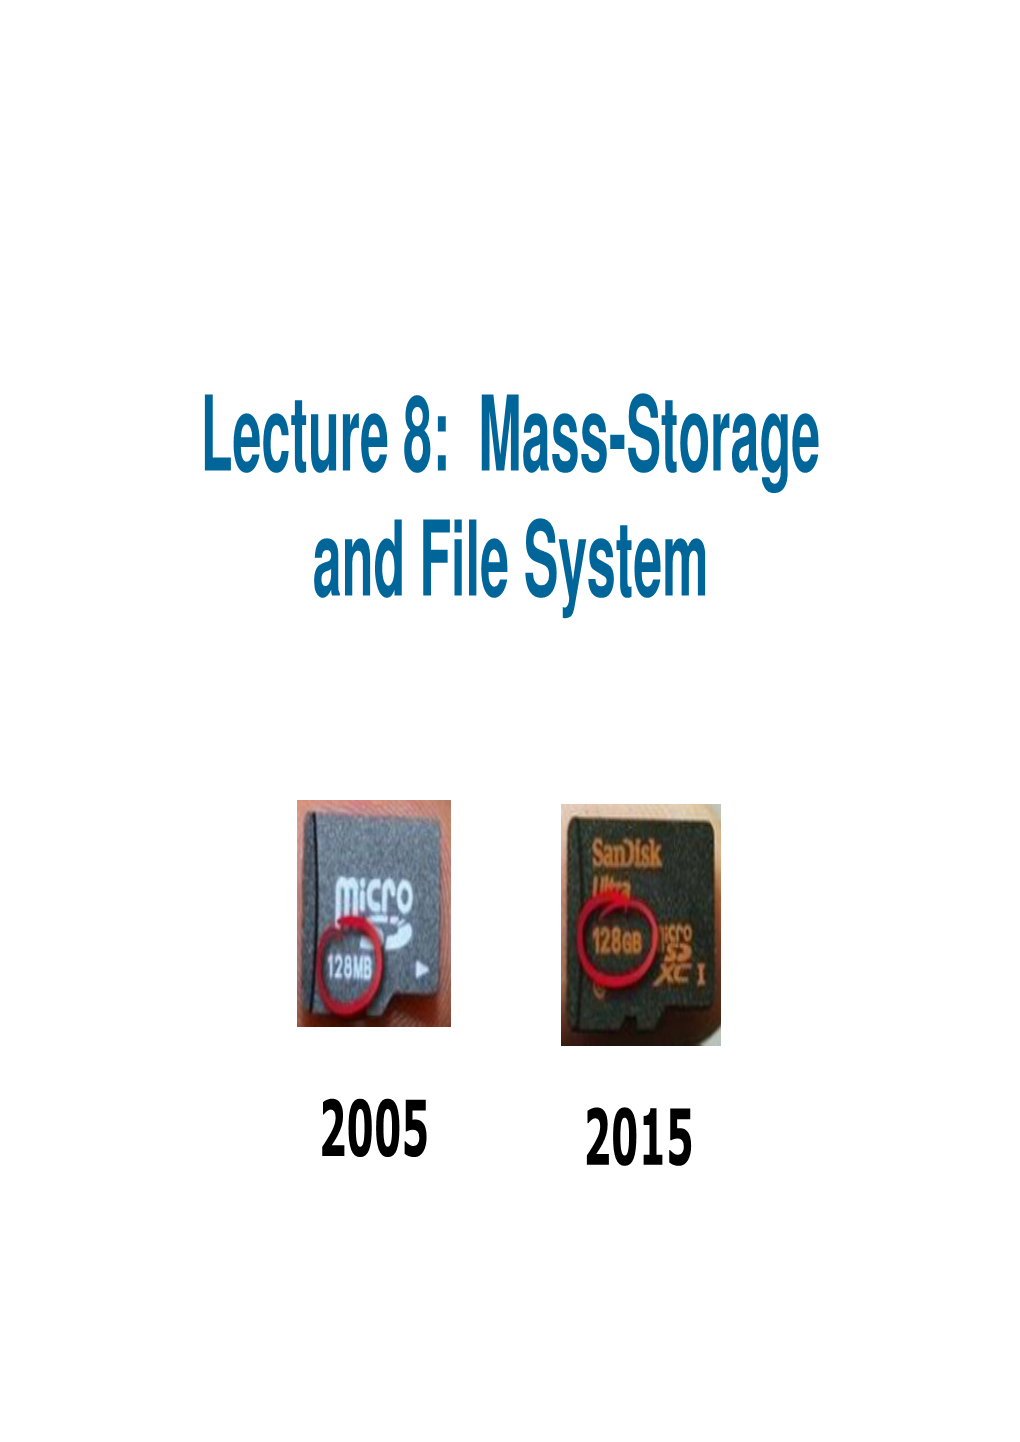 Lecture 8: Mass-Storage and File System